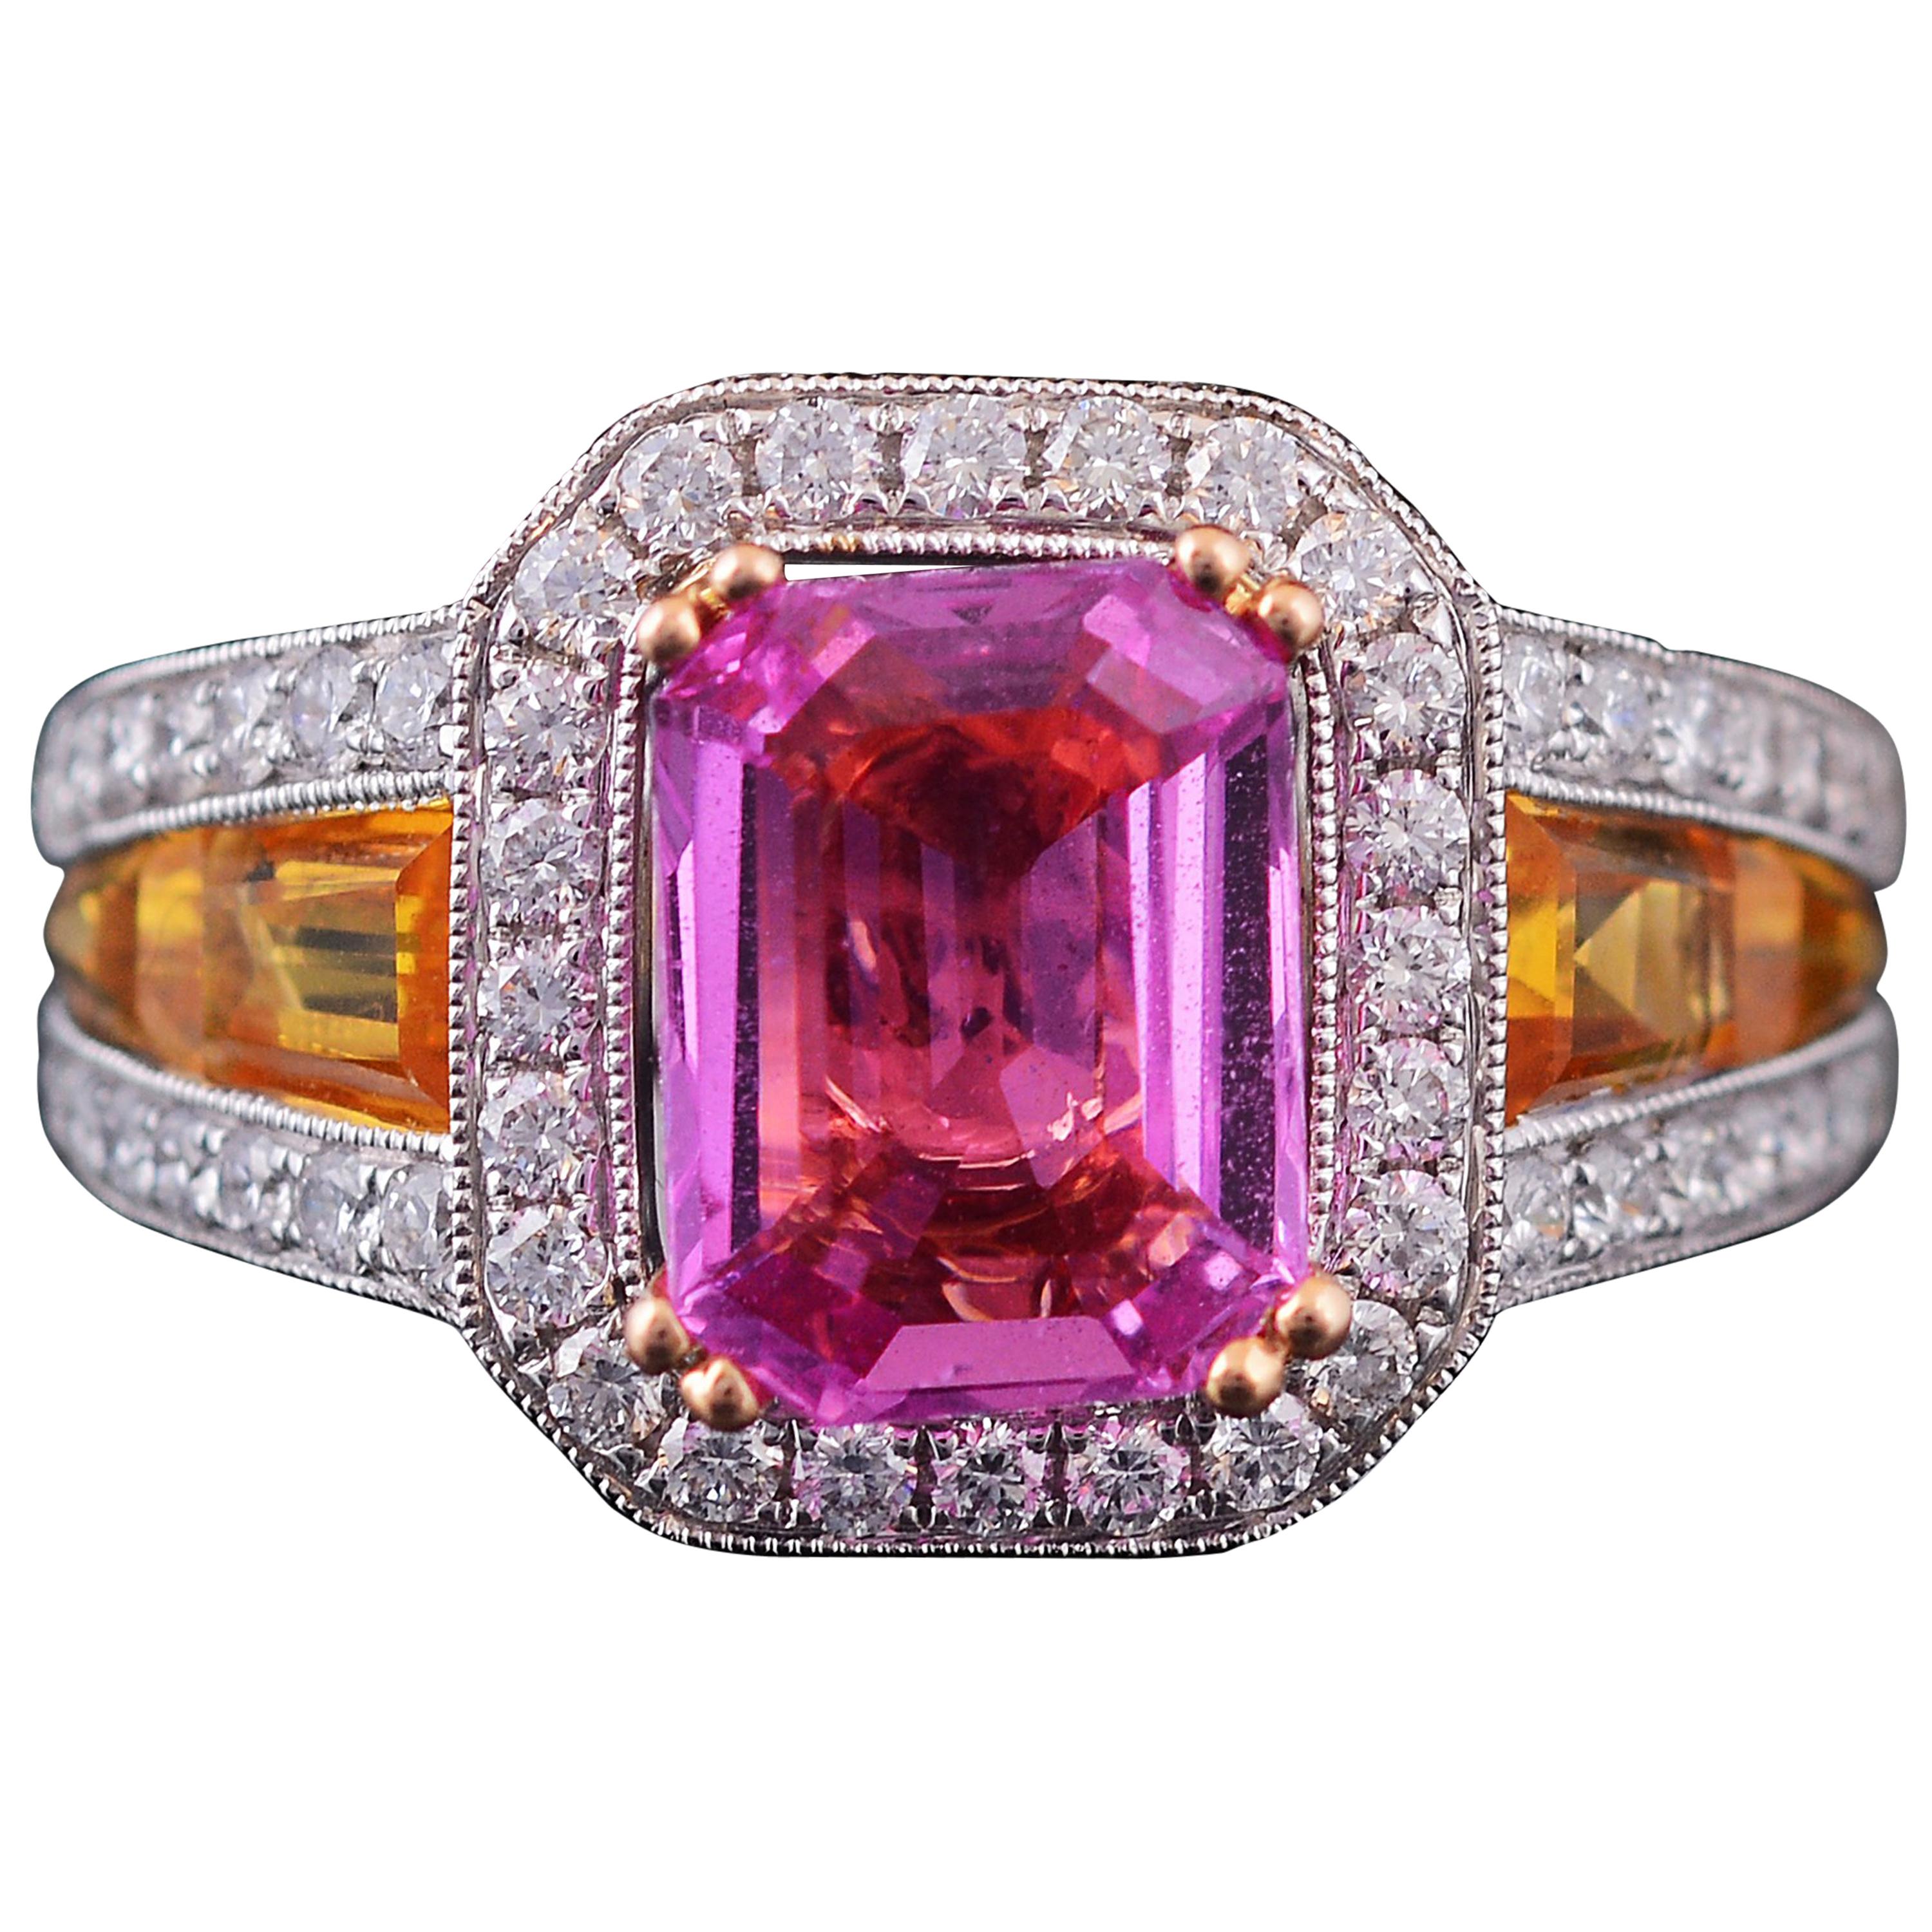 Set in 18 Karat White Gold, GRS Certified Pink and Yellow Sapphire 3-Stone Ring